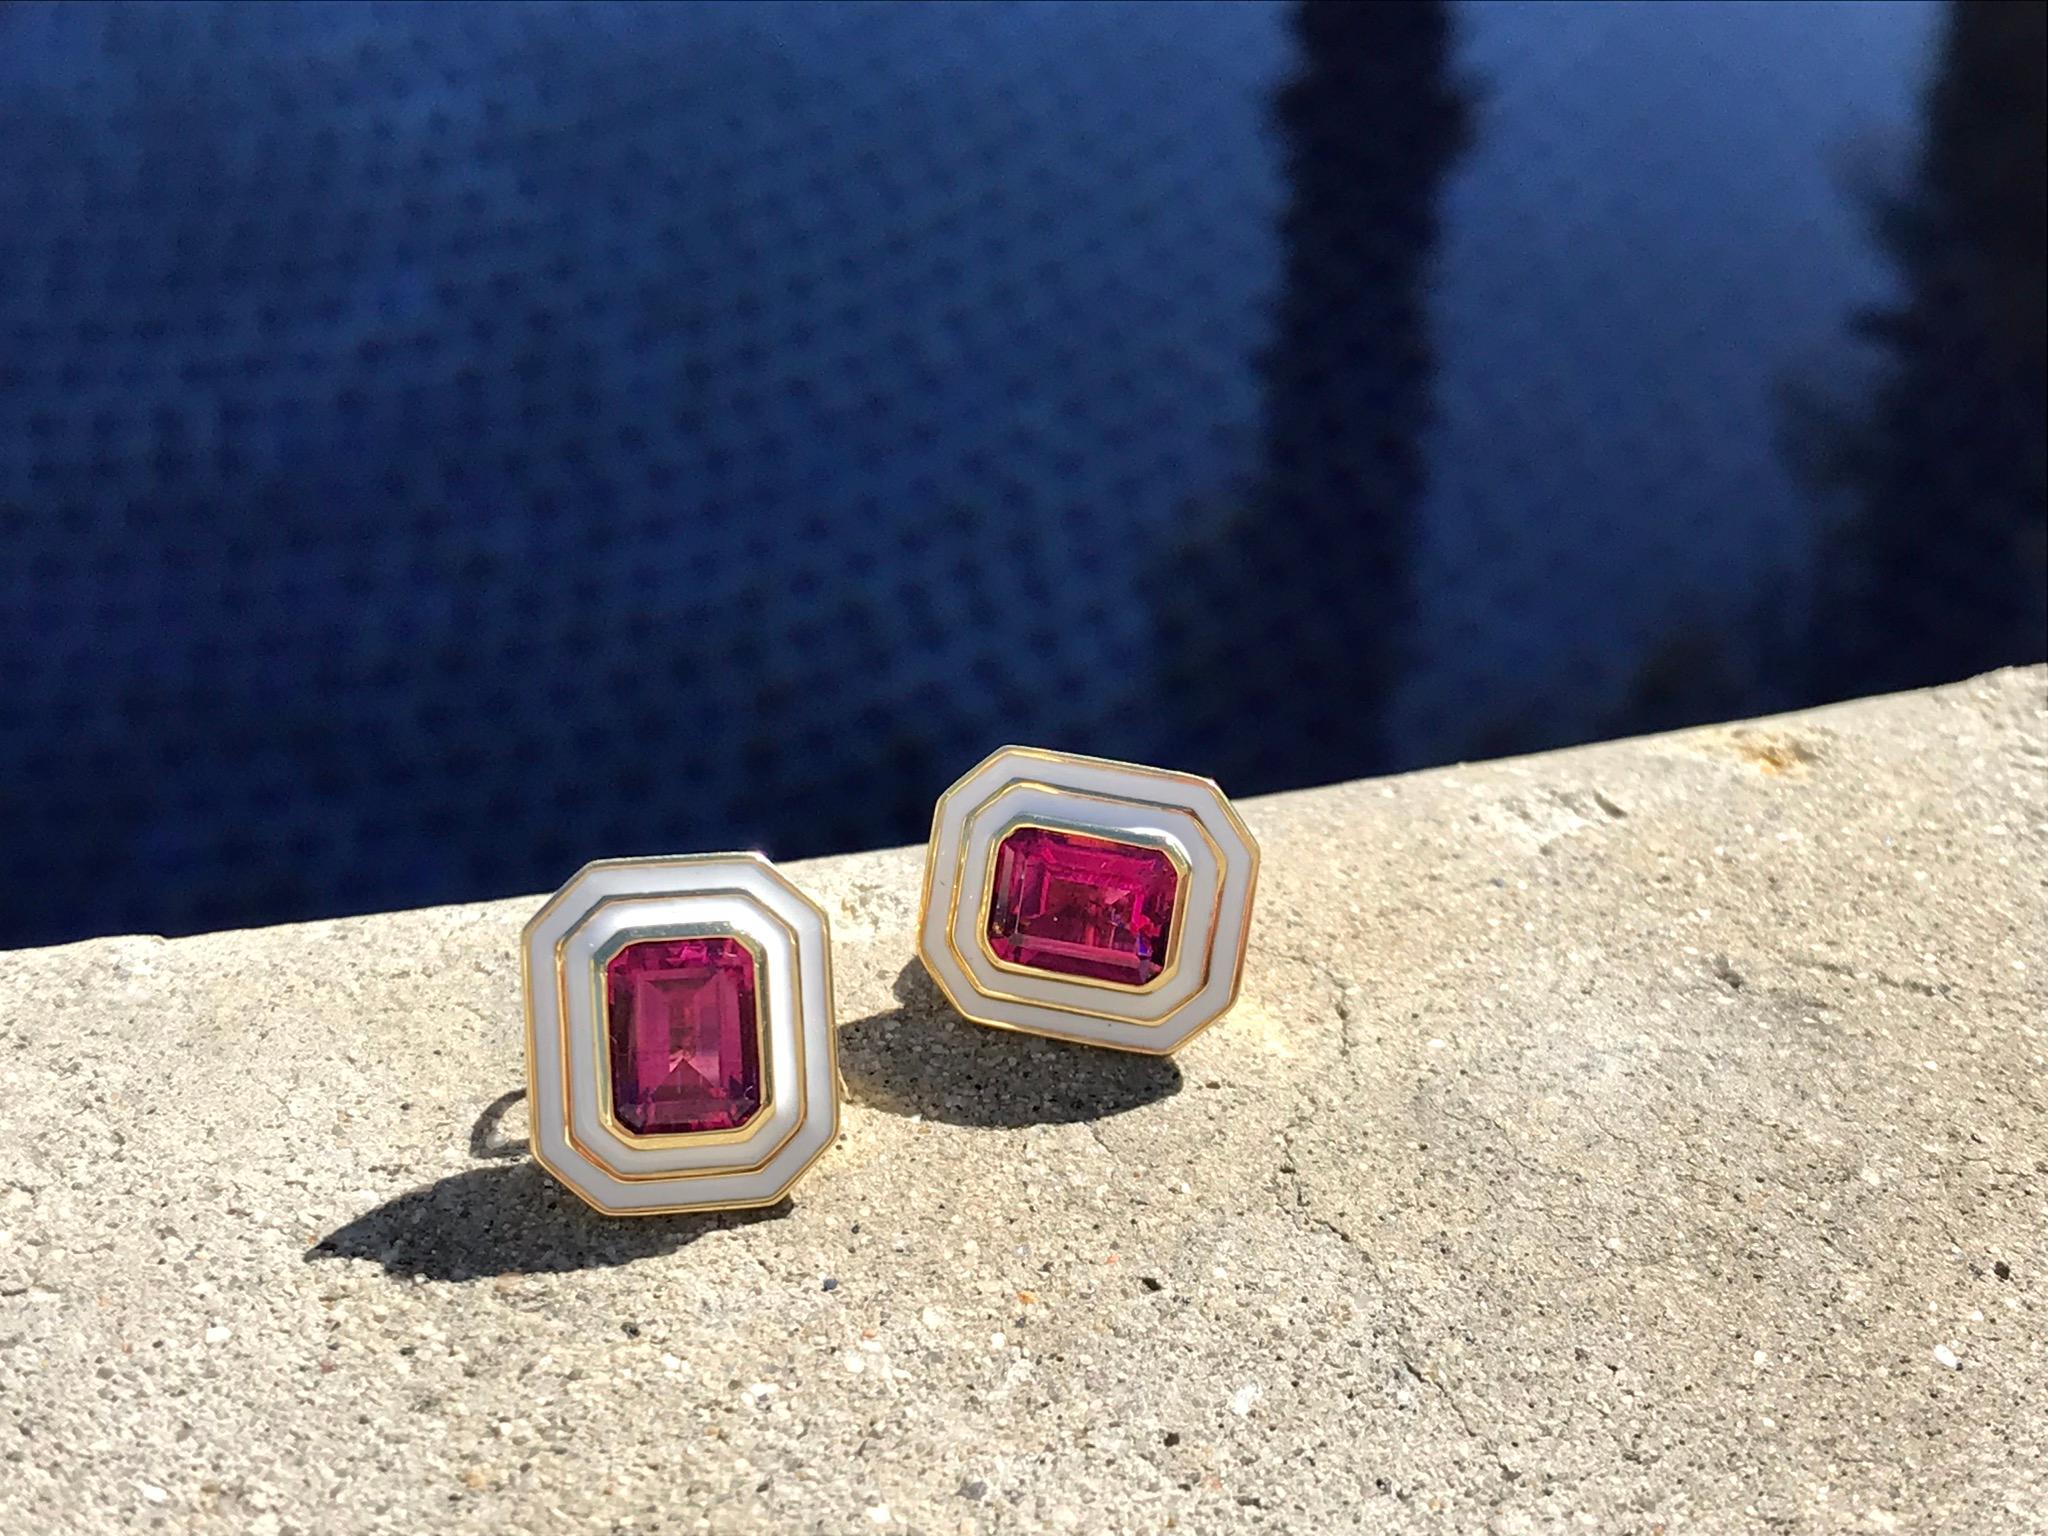 Bright and Beautiful 3.83 carats of Emerald Cut Brazilian Pink Tourmaline surrounded by White Enamel in 18k Yellow Gold. These are very vivid and the perfect earrings for Spring, Summer (and Fall for that matter) and set in his Museum Style series.